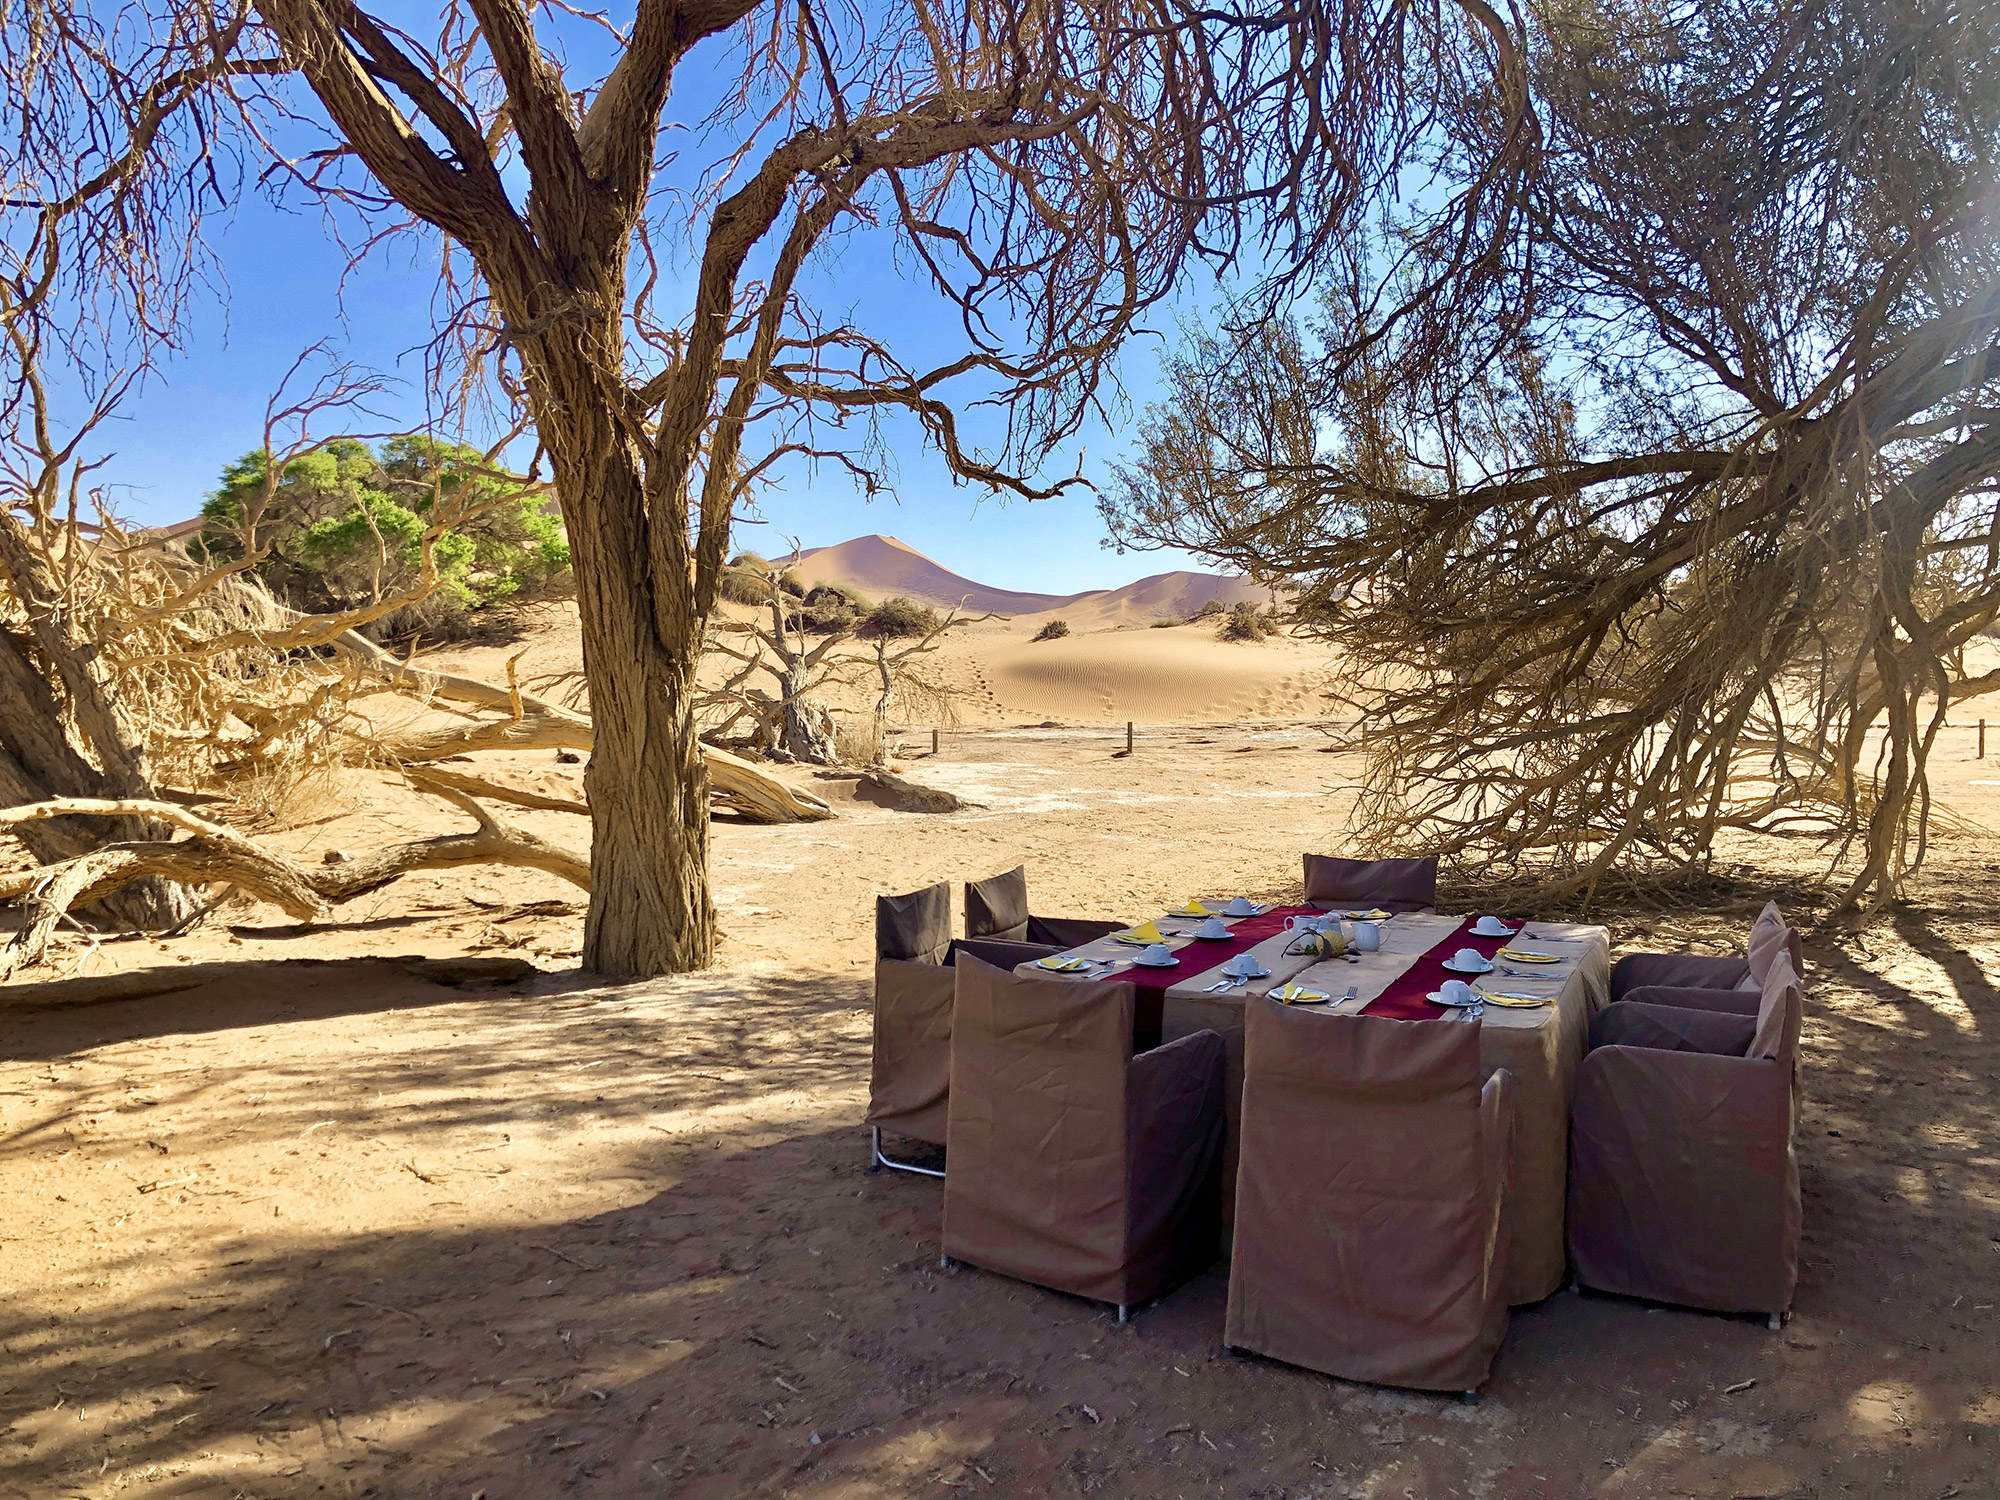 Table set in the shade of trees in the desert